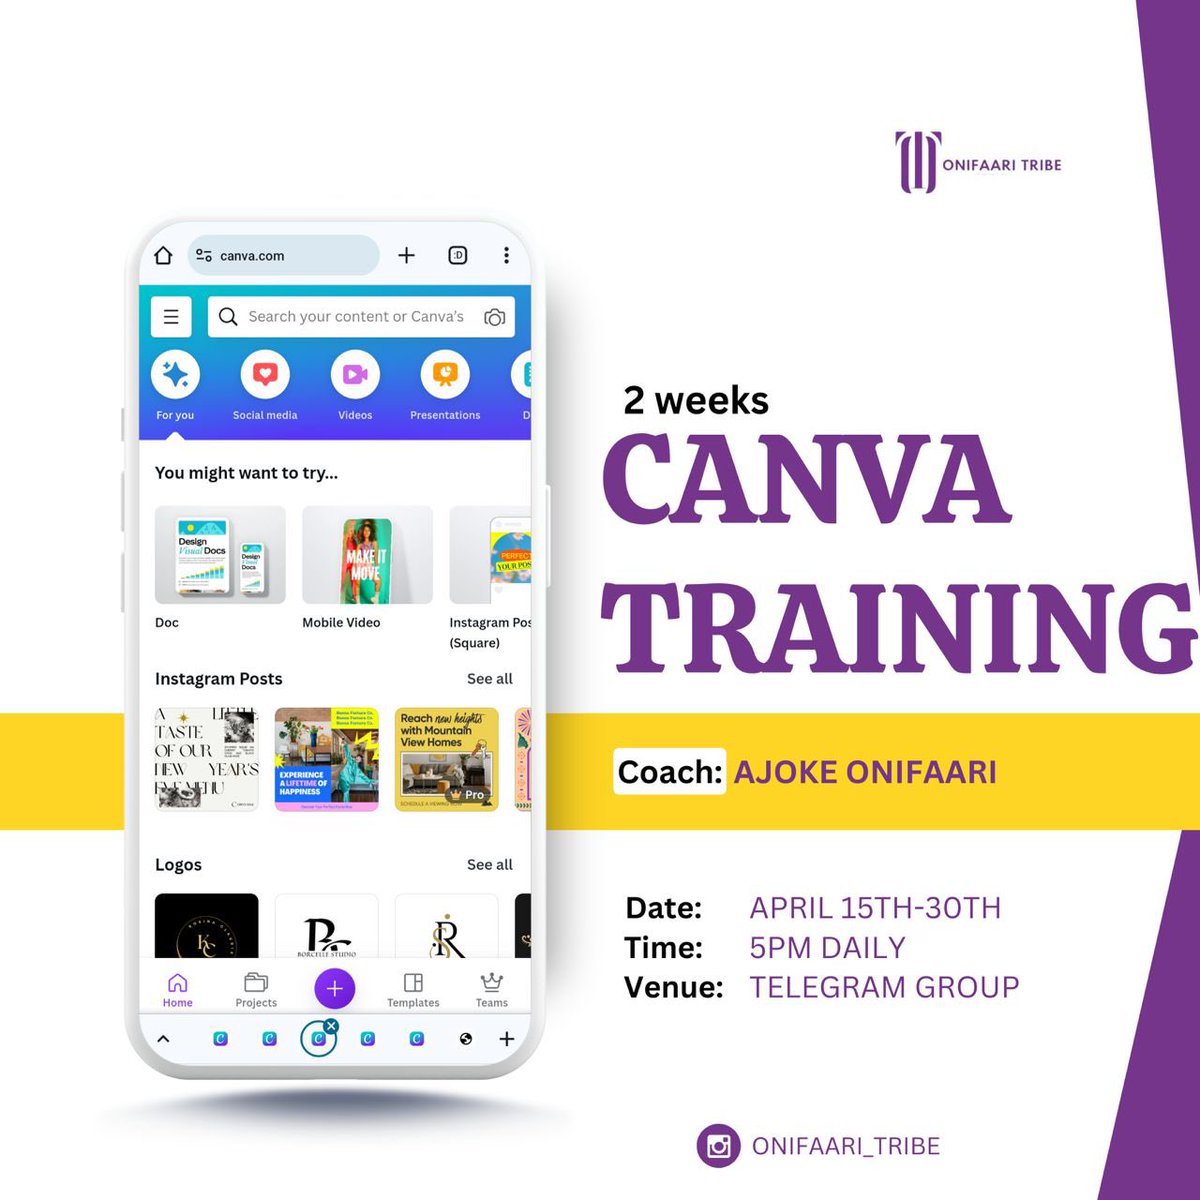 As a community that is about shaping our members for better, We took it upon ourself to teach our members the necessary skills to improve their business and this month we will be learning how to design with our smartphone using @canva Coach @AjokeOnifaari